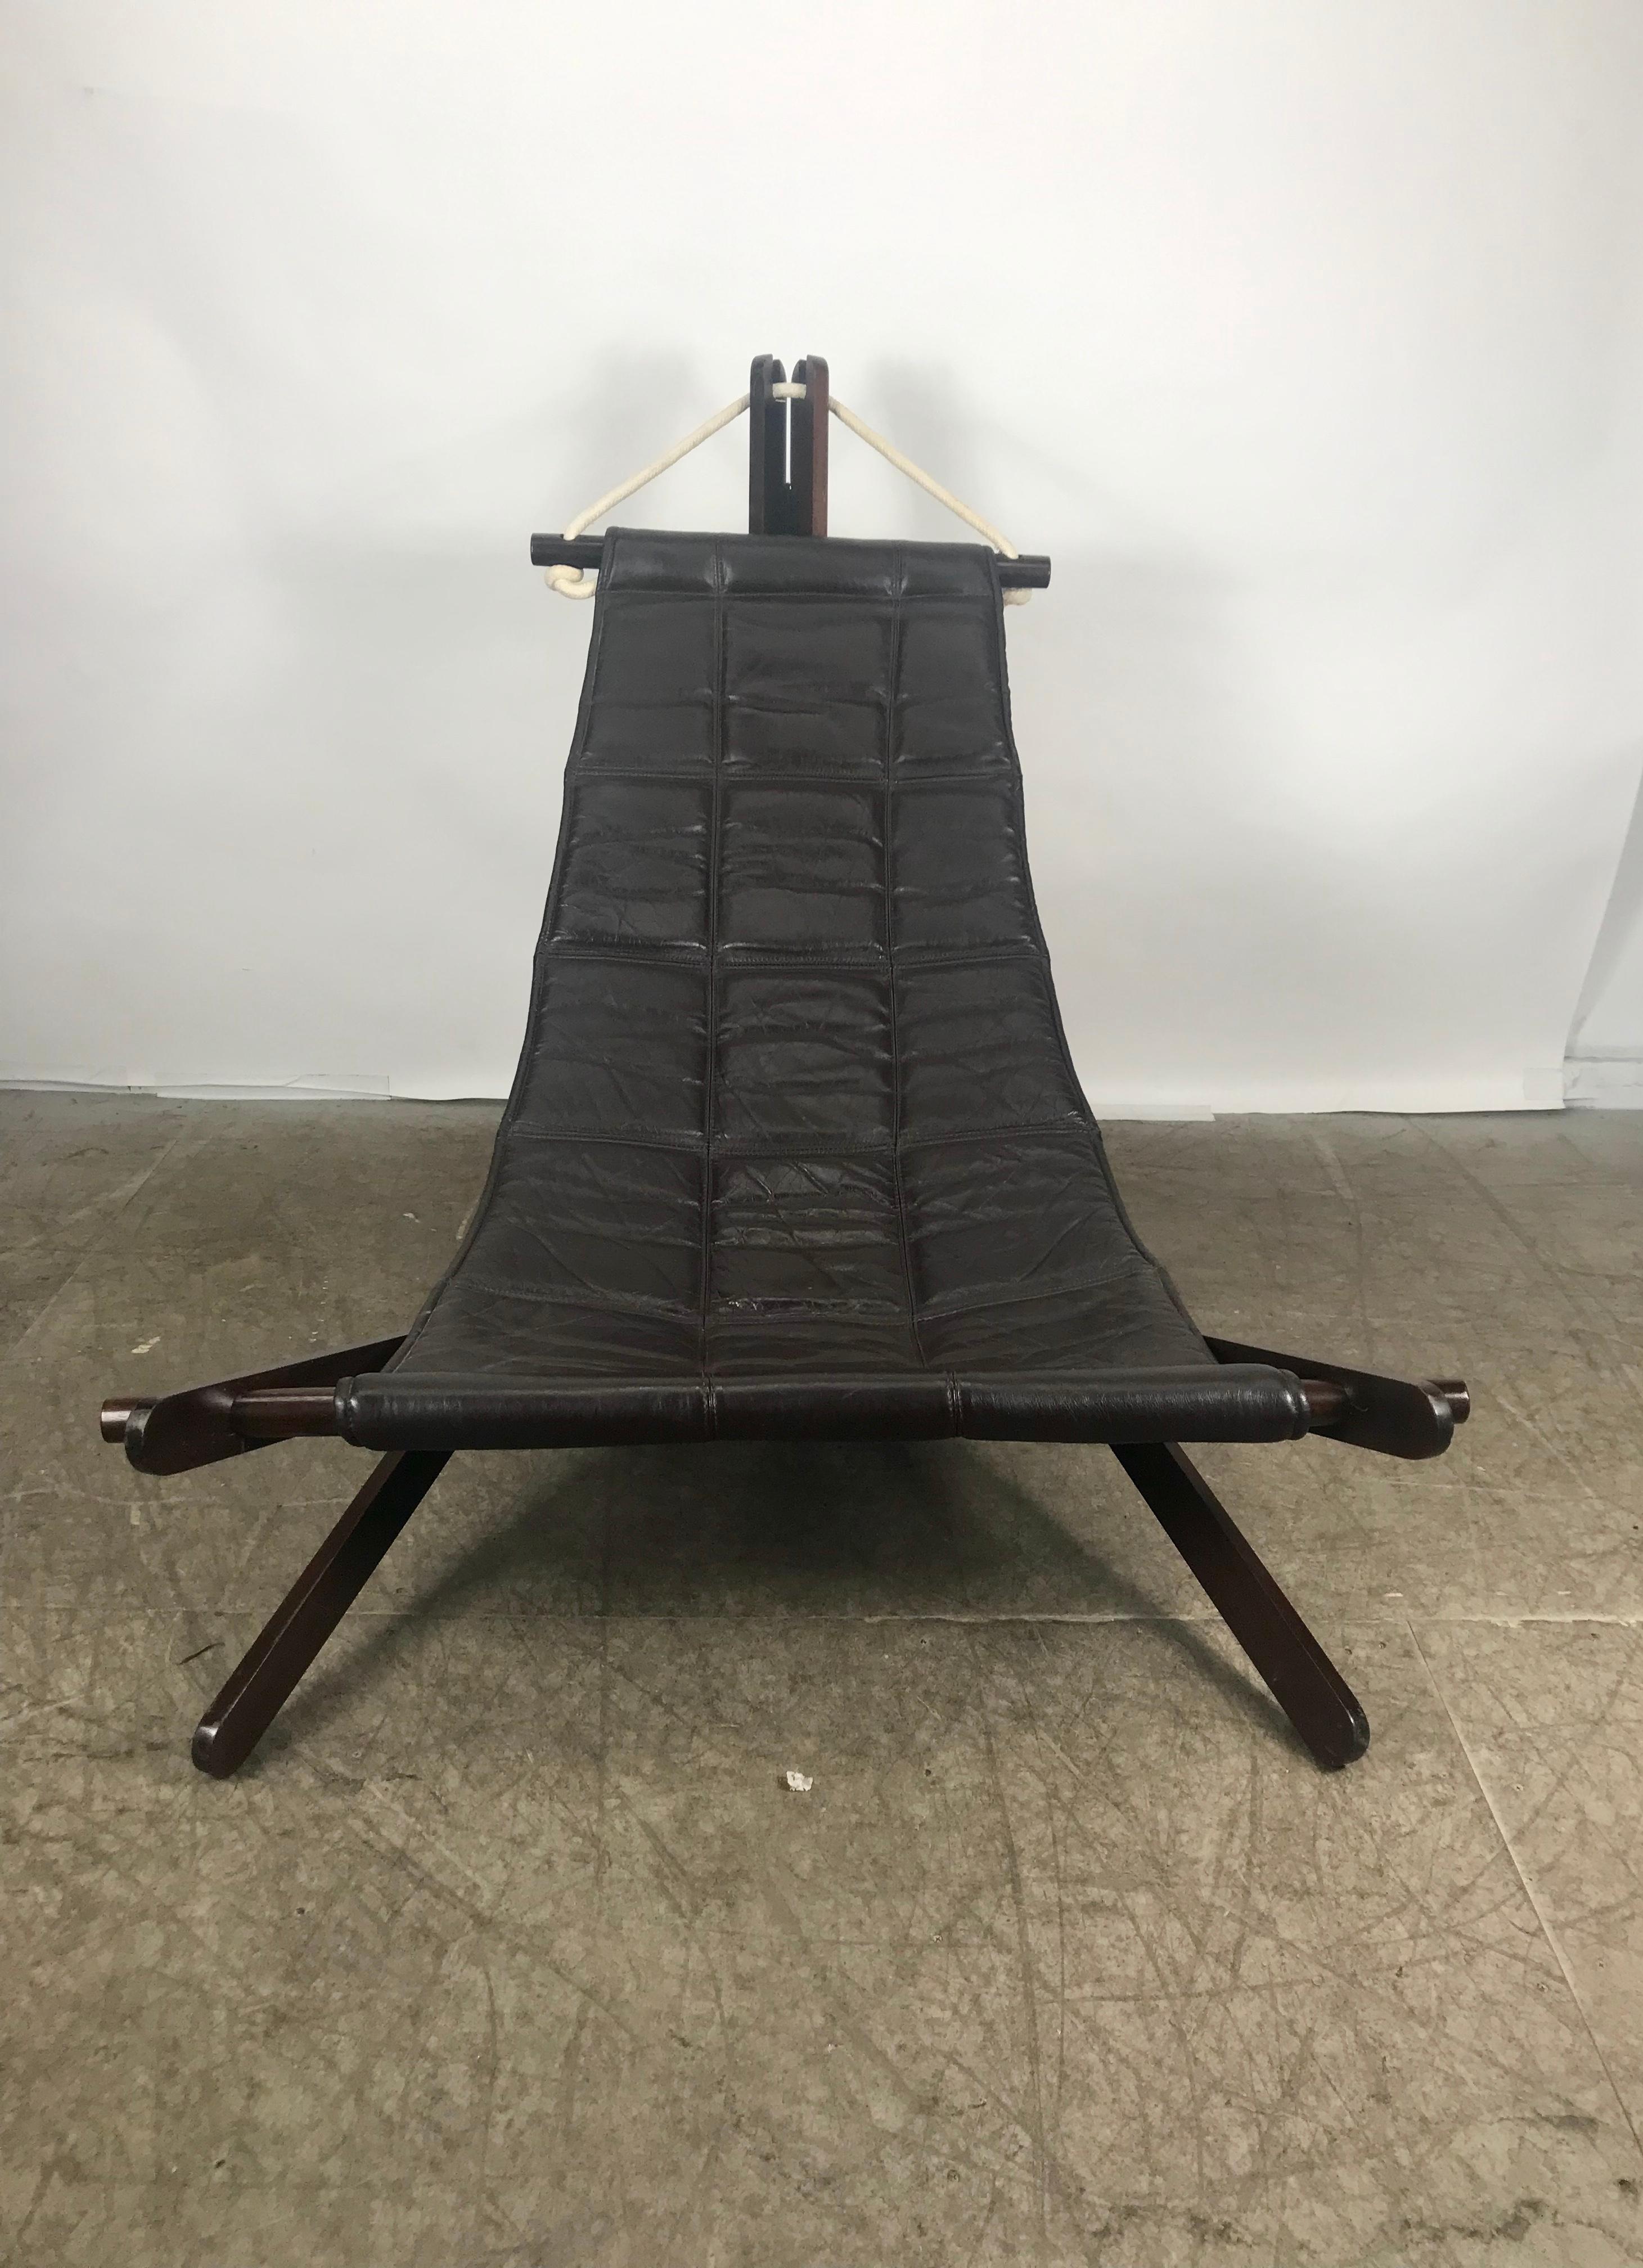 Rare and collectible sling chair in Cherry (Jatoba) wood, rich brown leather and rope by British architect Dominic Michaelis for Moveis Corazza, Brazil. Hand delivery avail to New York City or anywhere en route from Buffalo, NY.